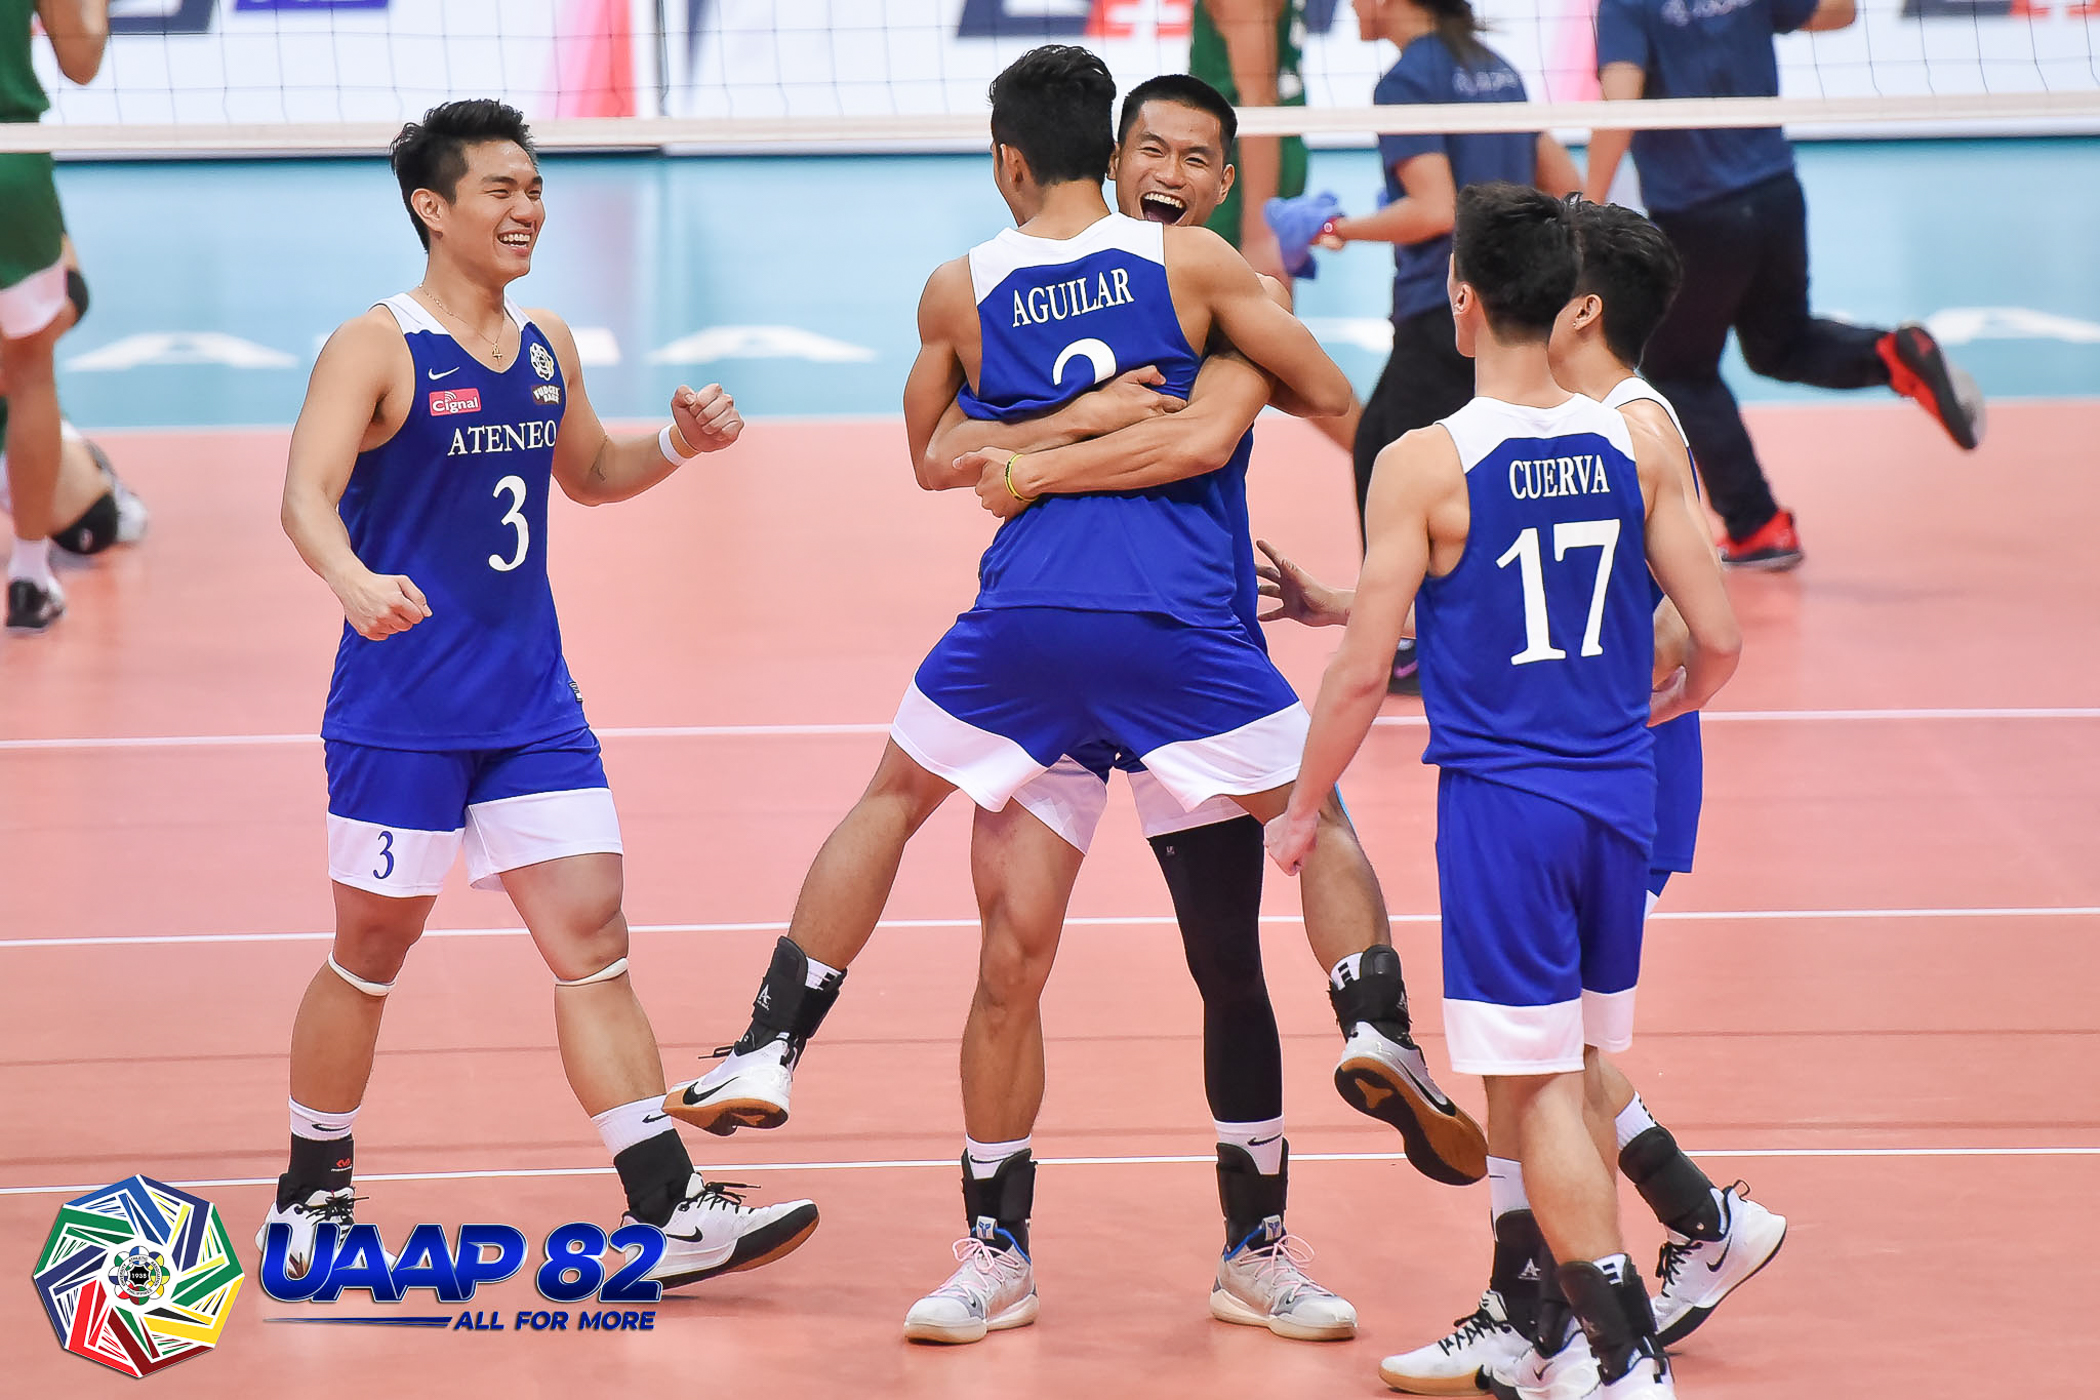 Ateneo tallies first win, fends off La Salle in straight sets